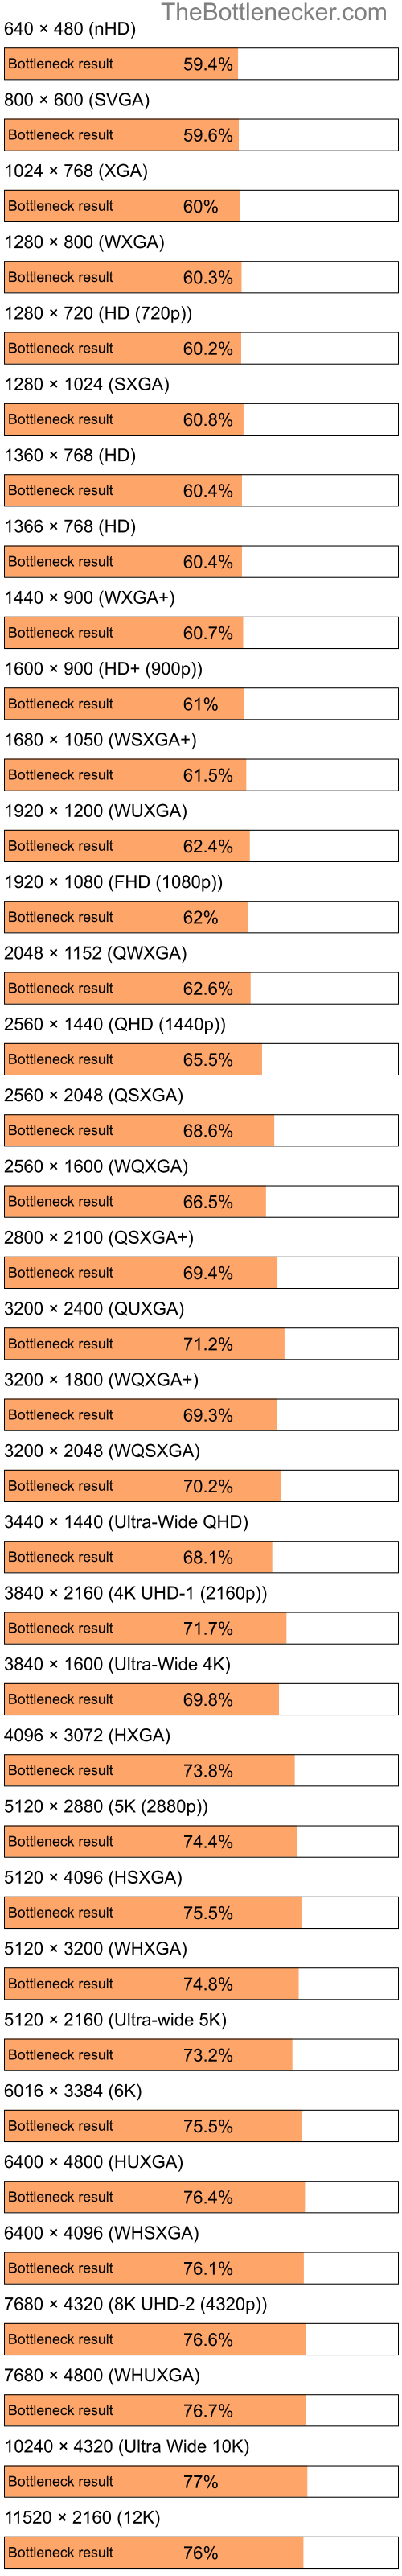 Bottleneck results by resolution for Intel Atom Z520 and AMD Radeon HD 4200 in General Tasks